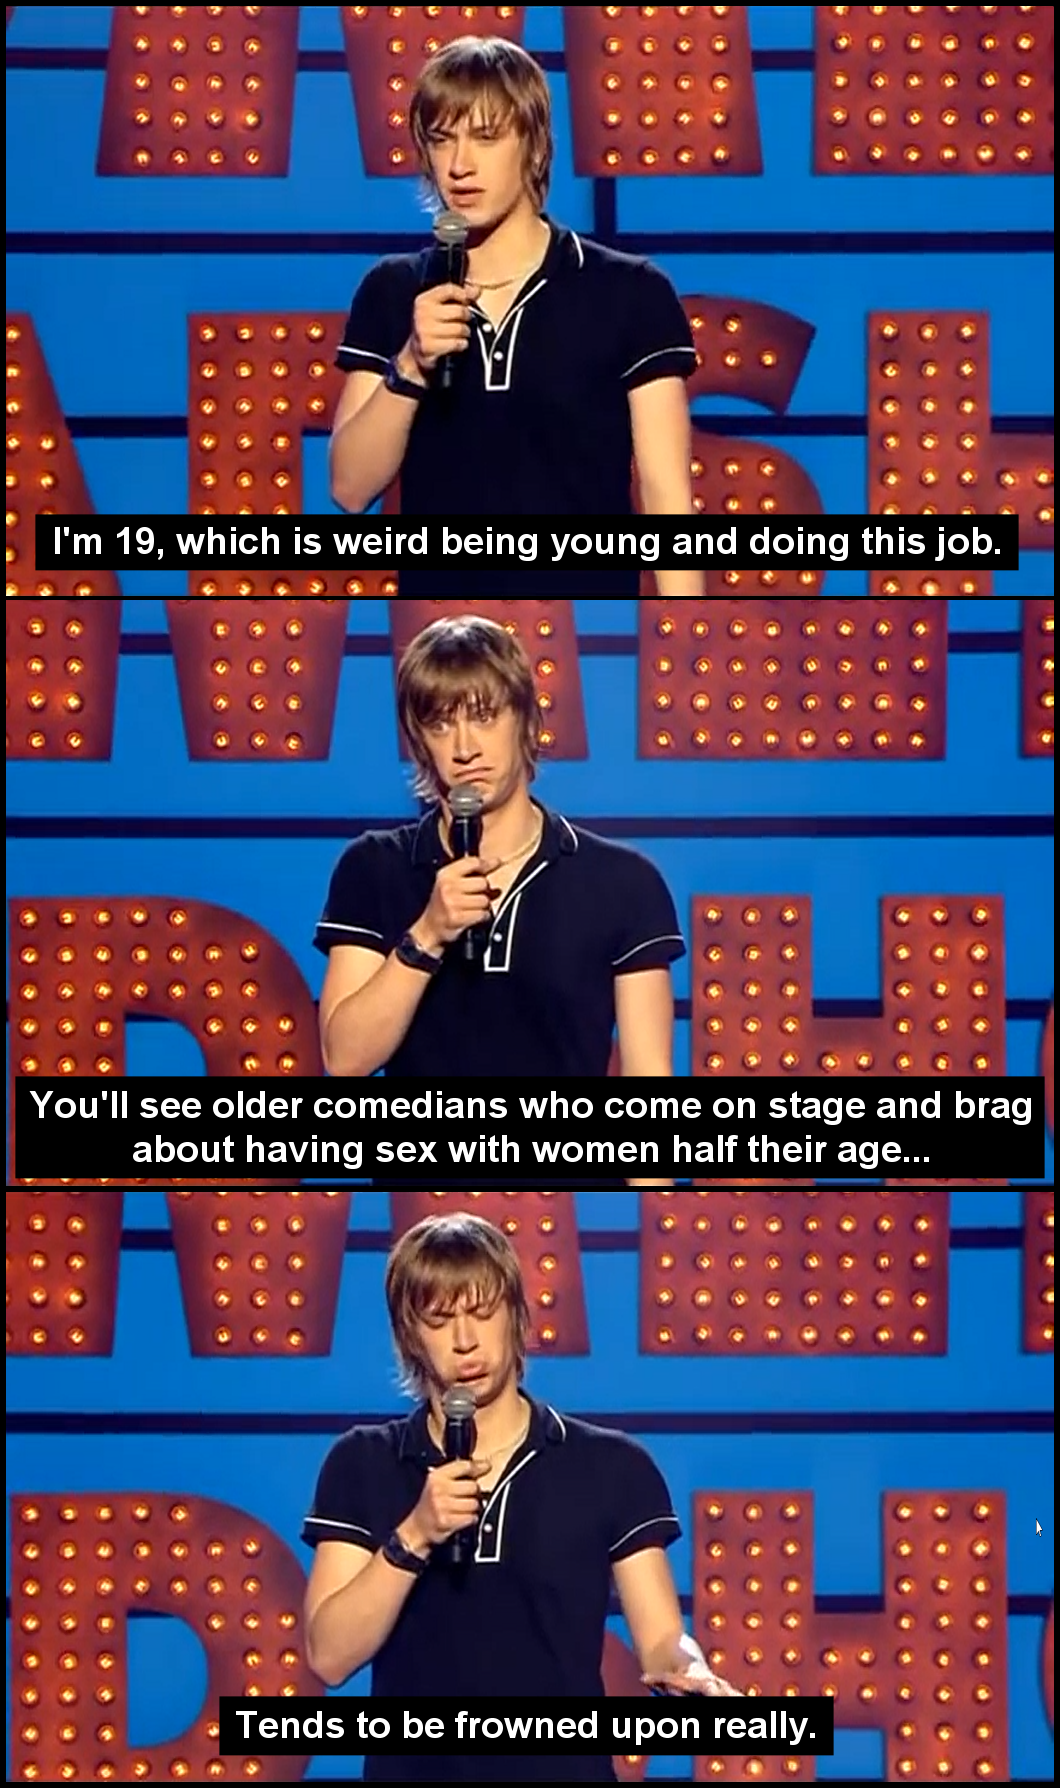 television program - I'm 19, which is weird being young and doing this job. You'll see older comedians who come on stage and brag about having sex with women half their age... Tends to be frowned upon really.